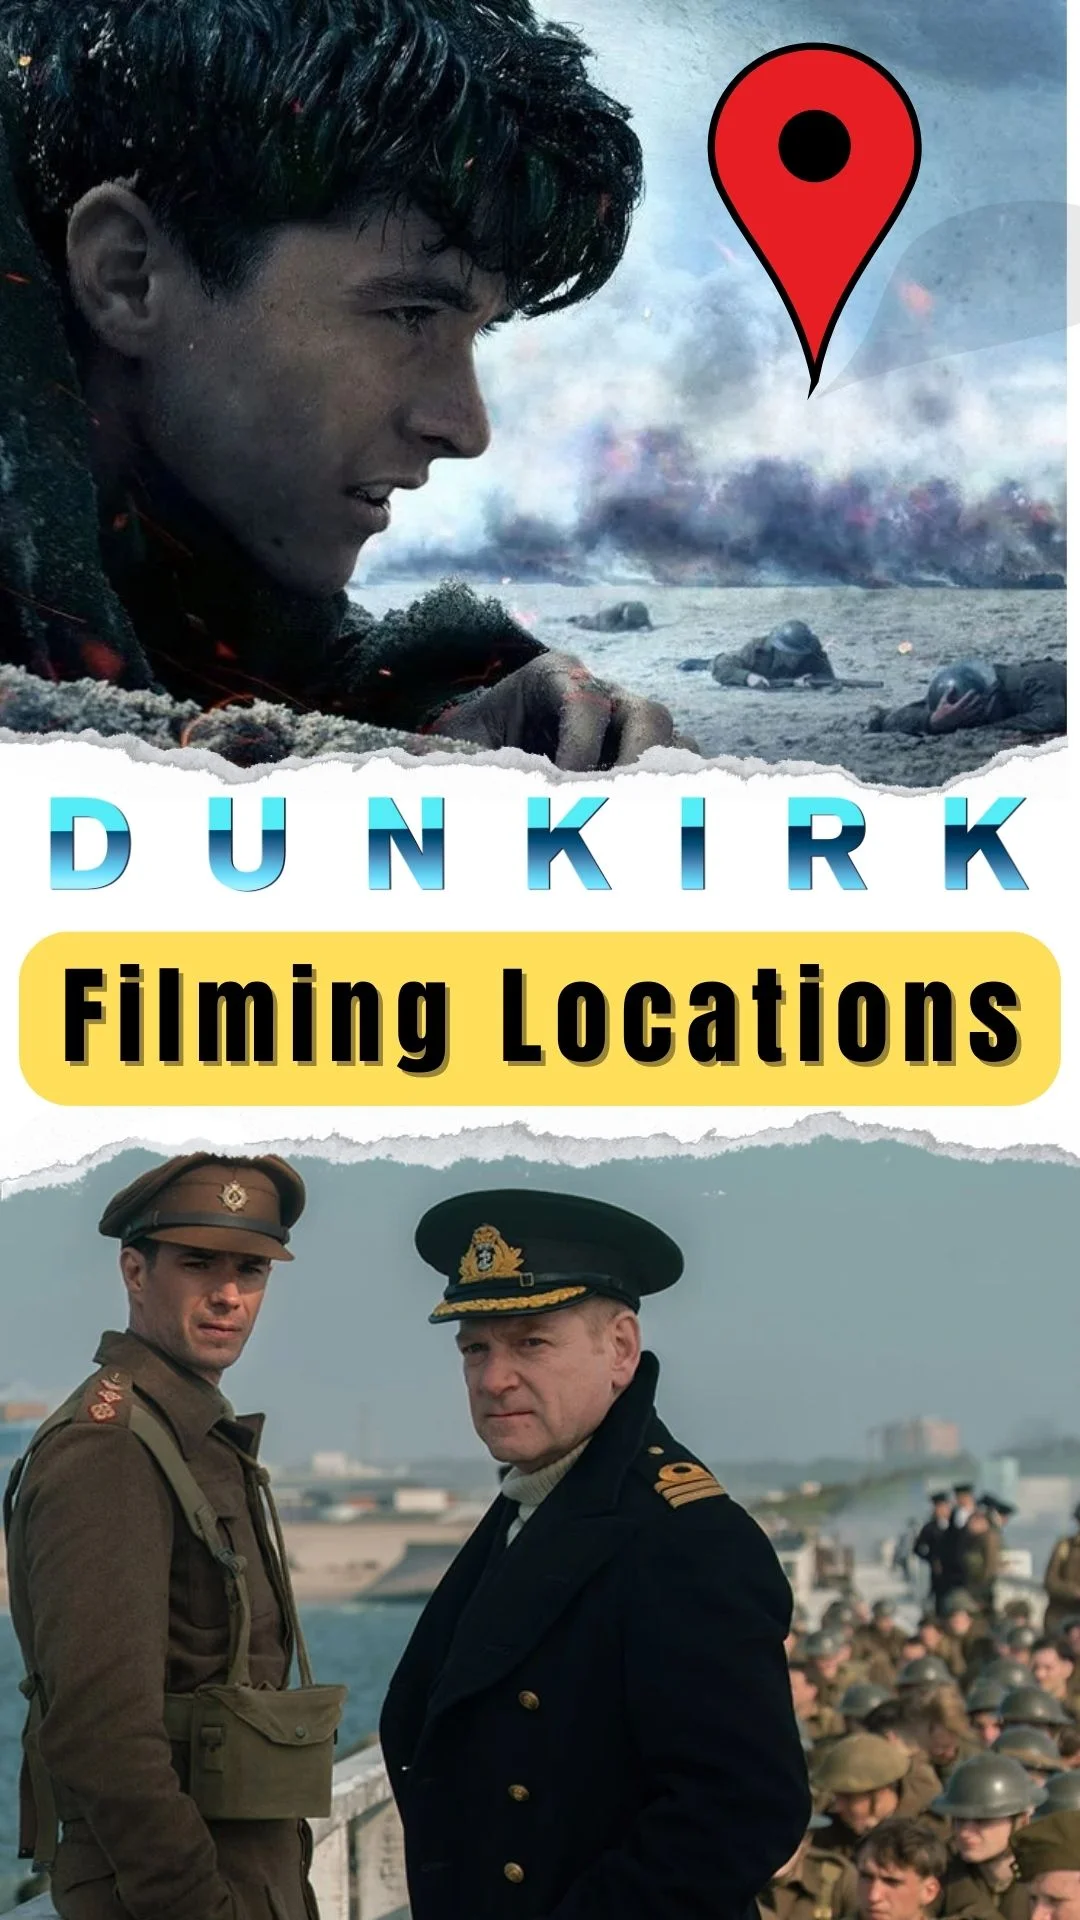 Dunkirk Filming Locations